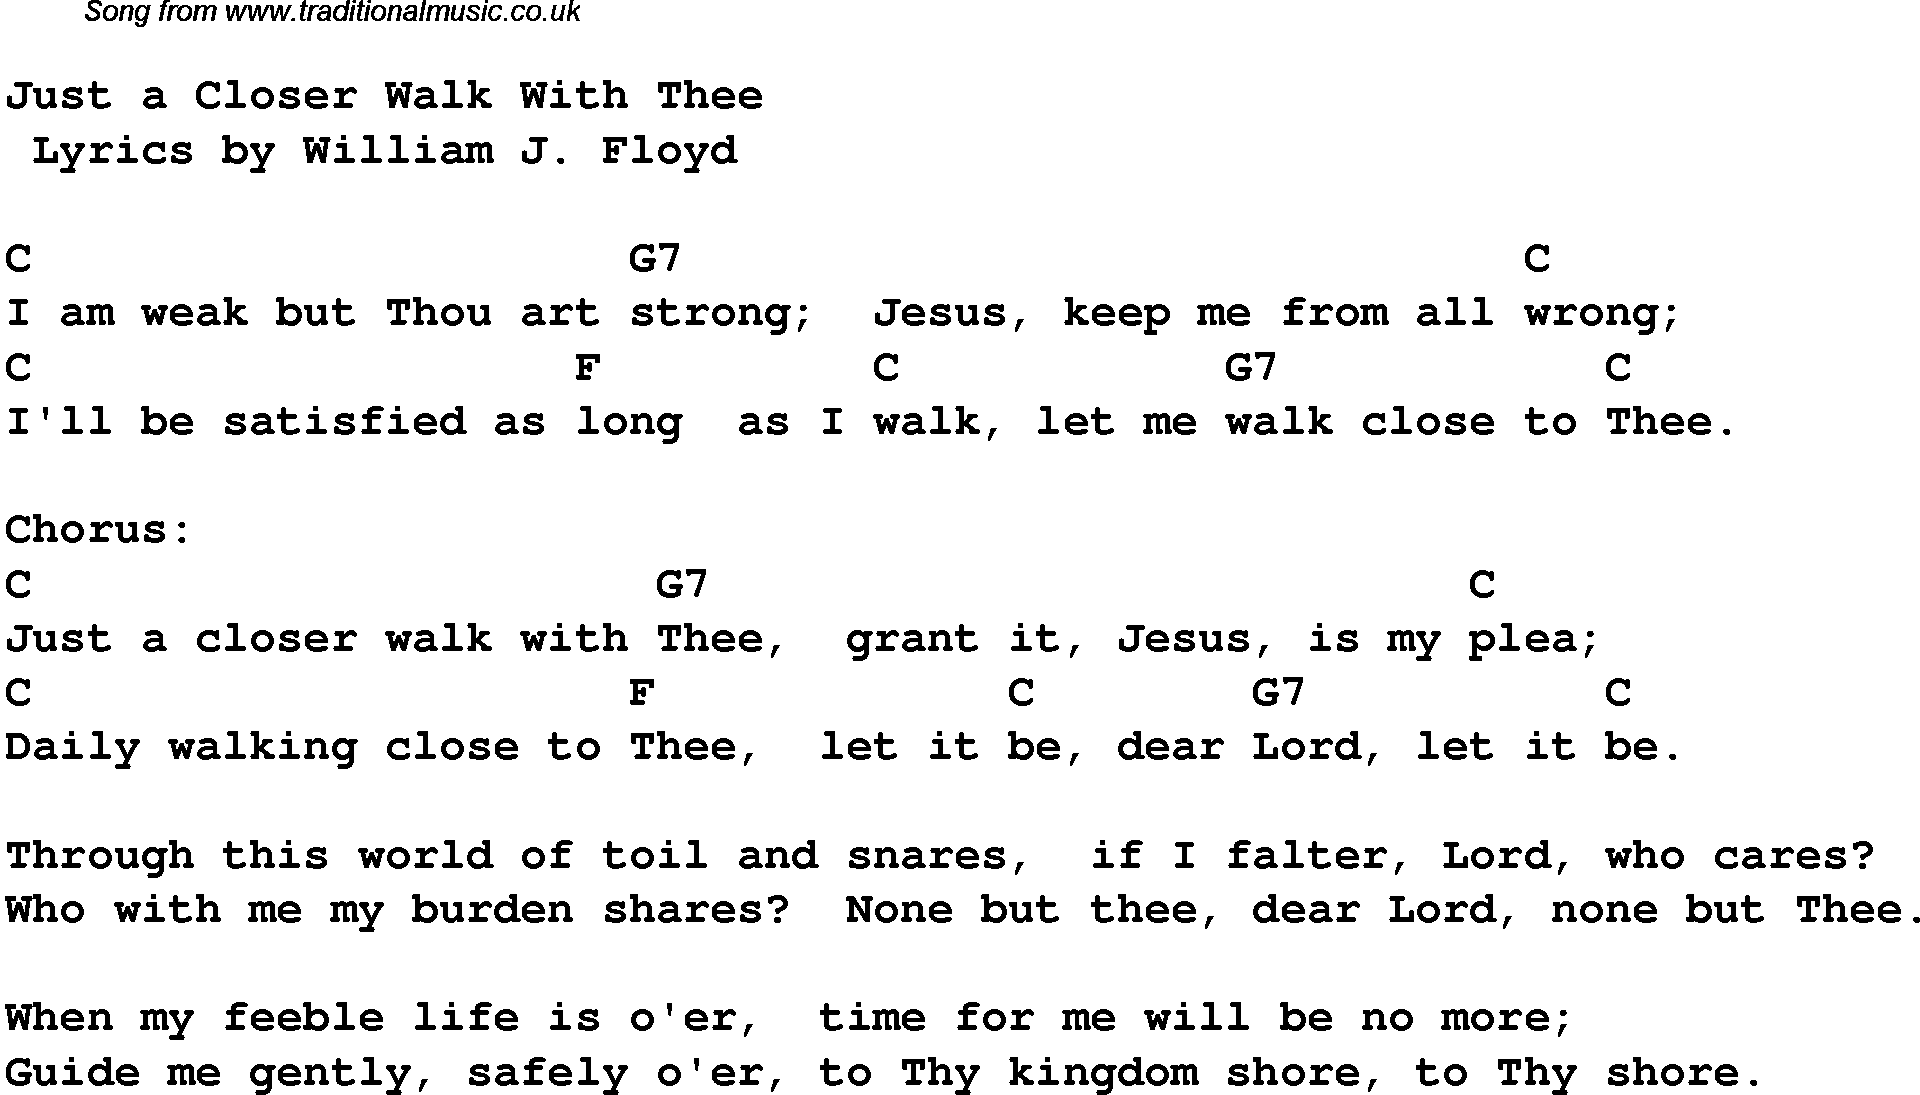 Gospel Song: just-a-closer-walk-with-thee, lyrics and chords.